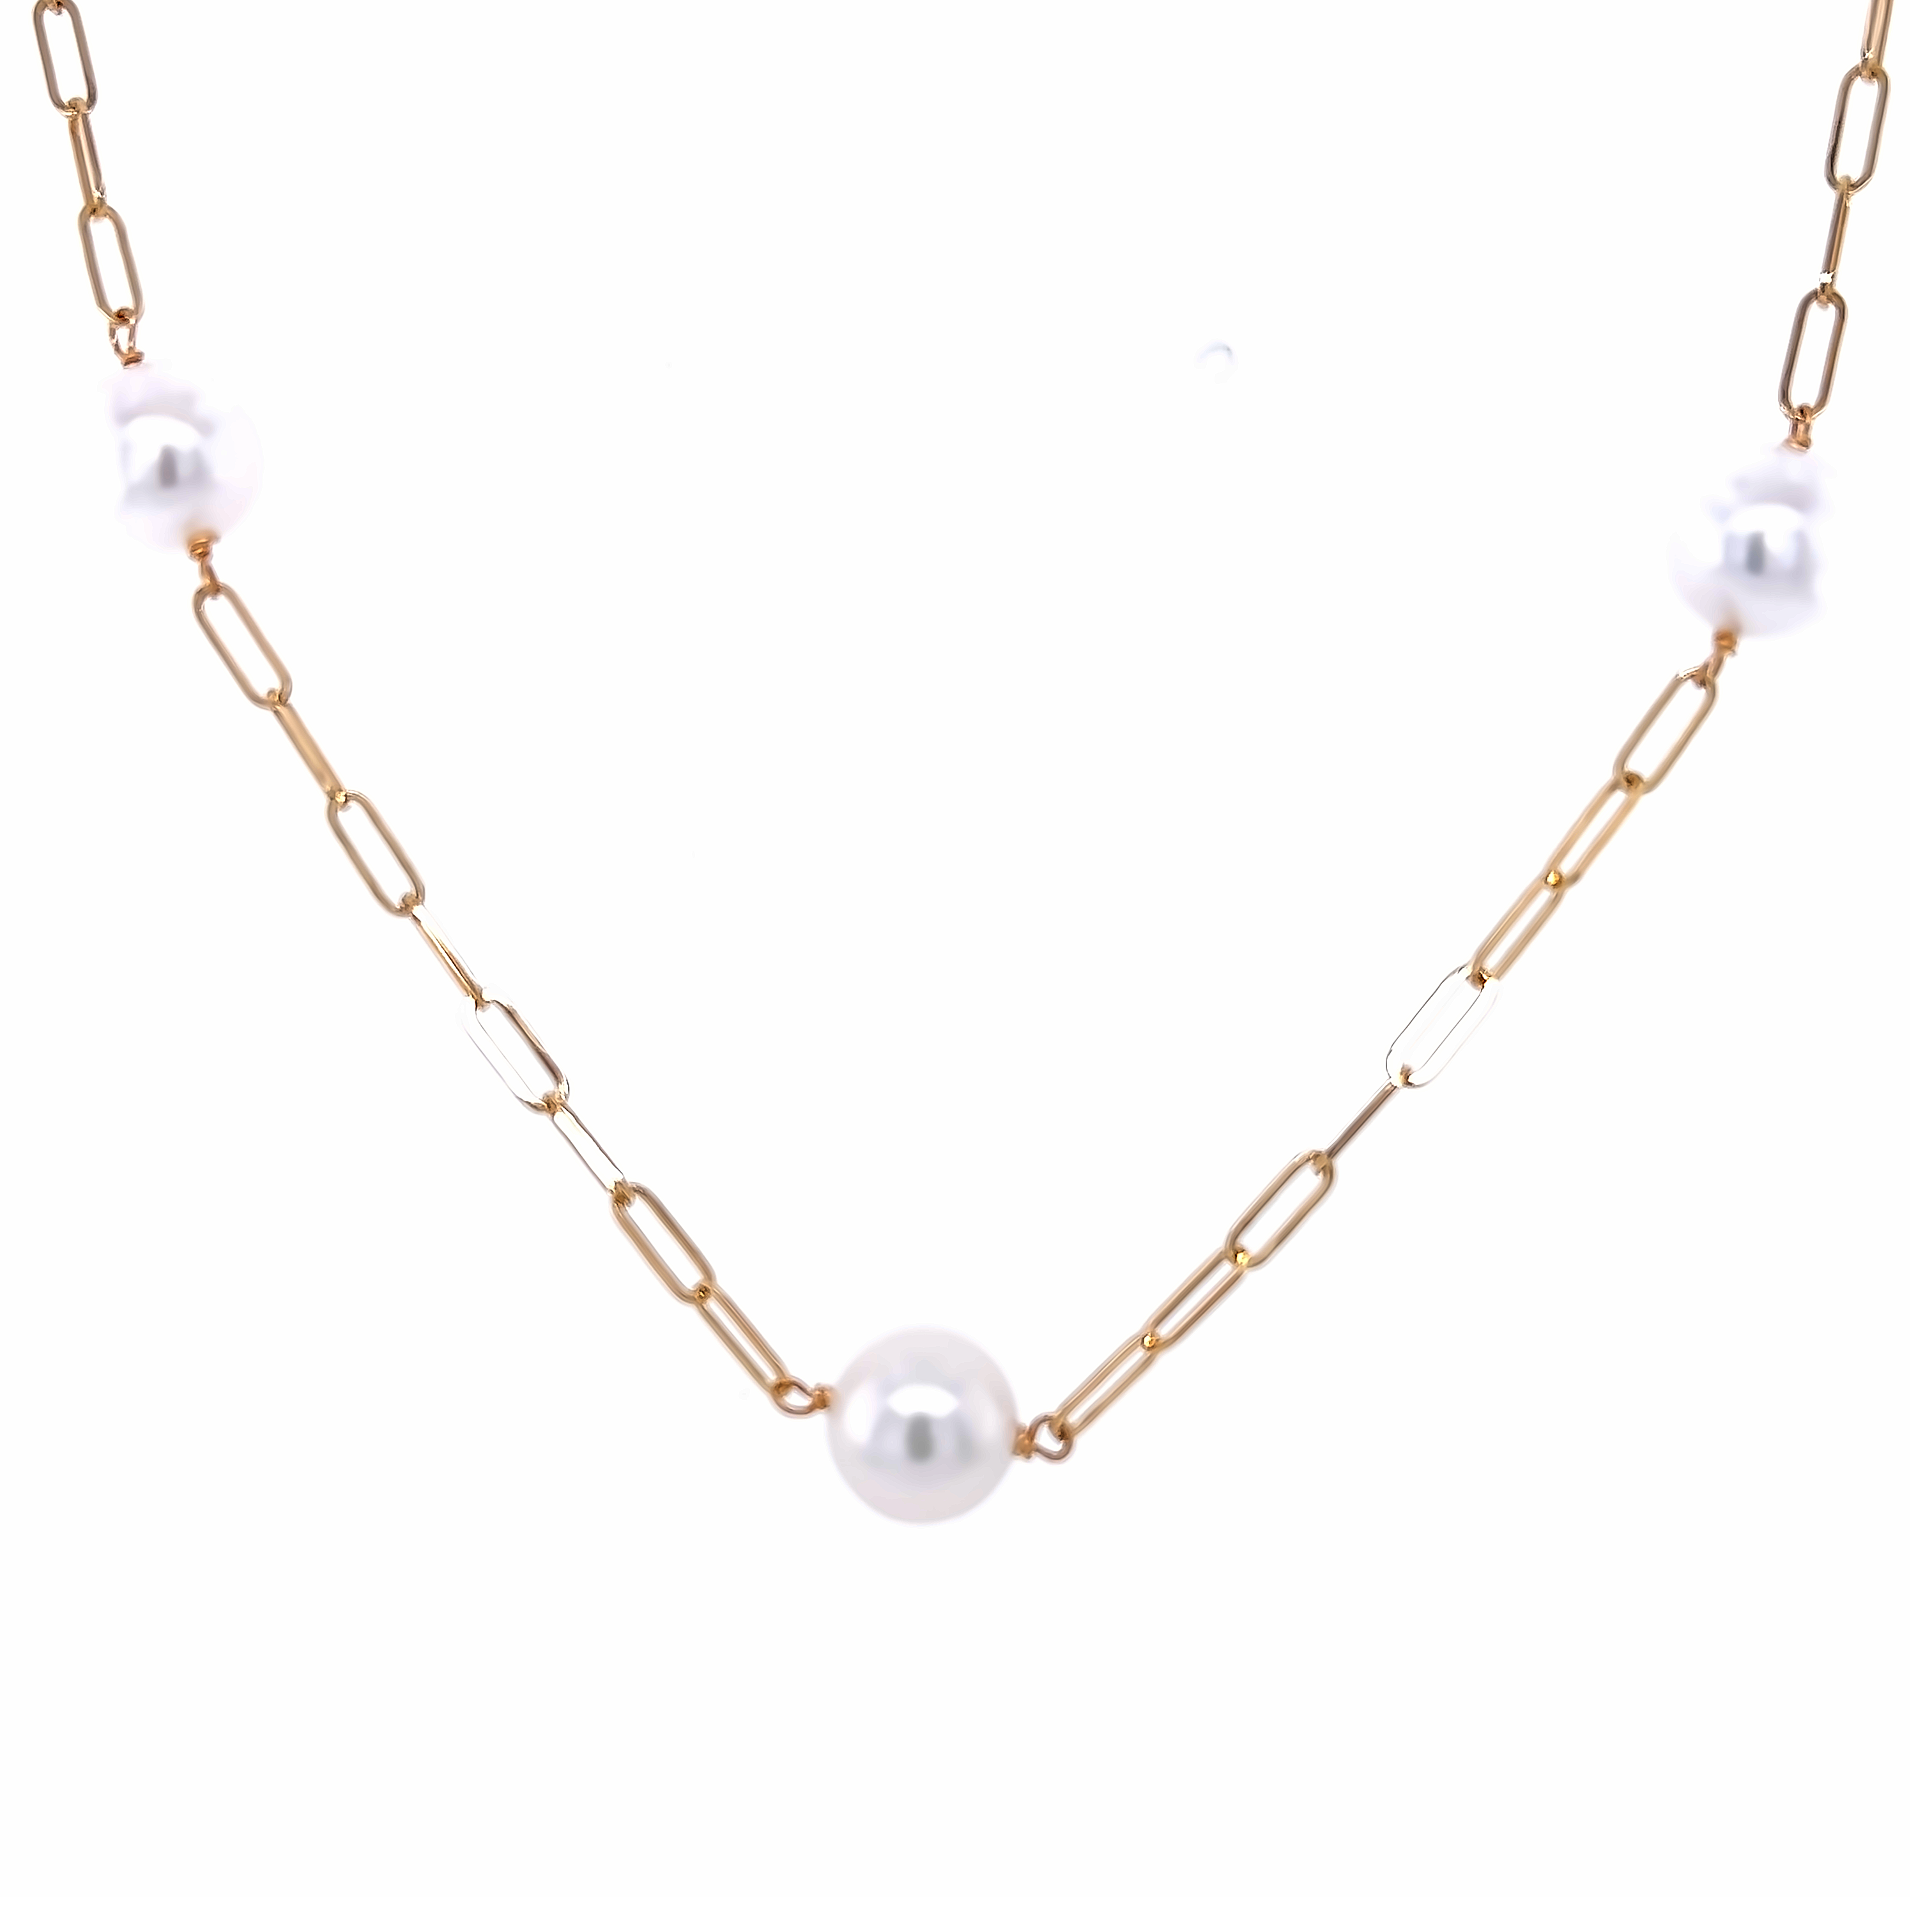 14 karat yellow gold paperclip chain and pearl necklace with 7=8.00-9.00mm fresh water Pearls